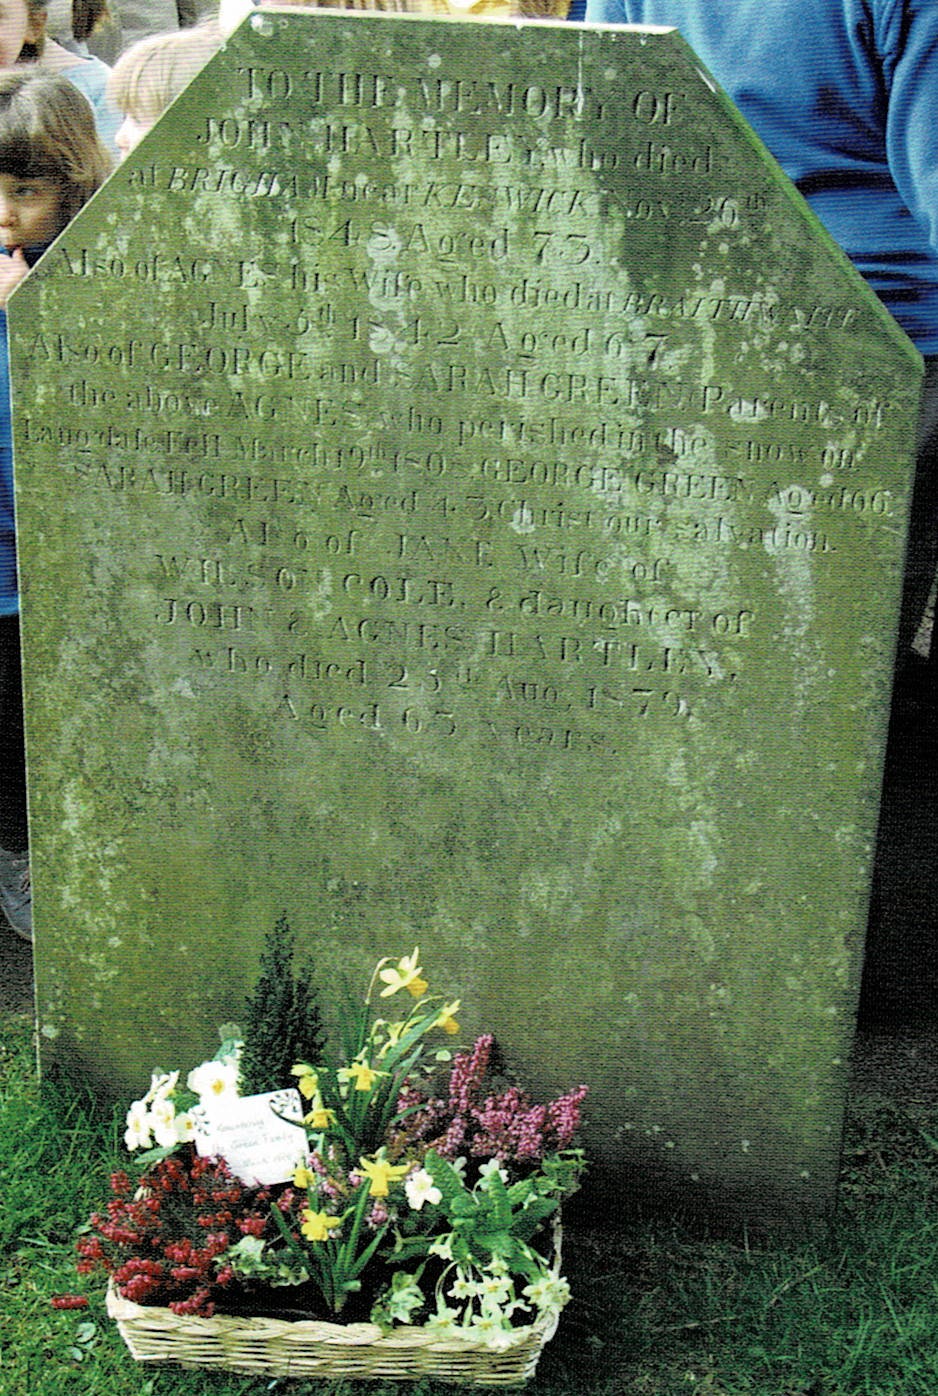 The grave in St. Oswald’s churchyard, Grasmere.